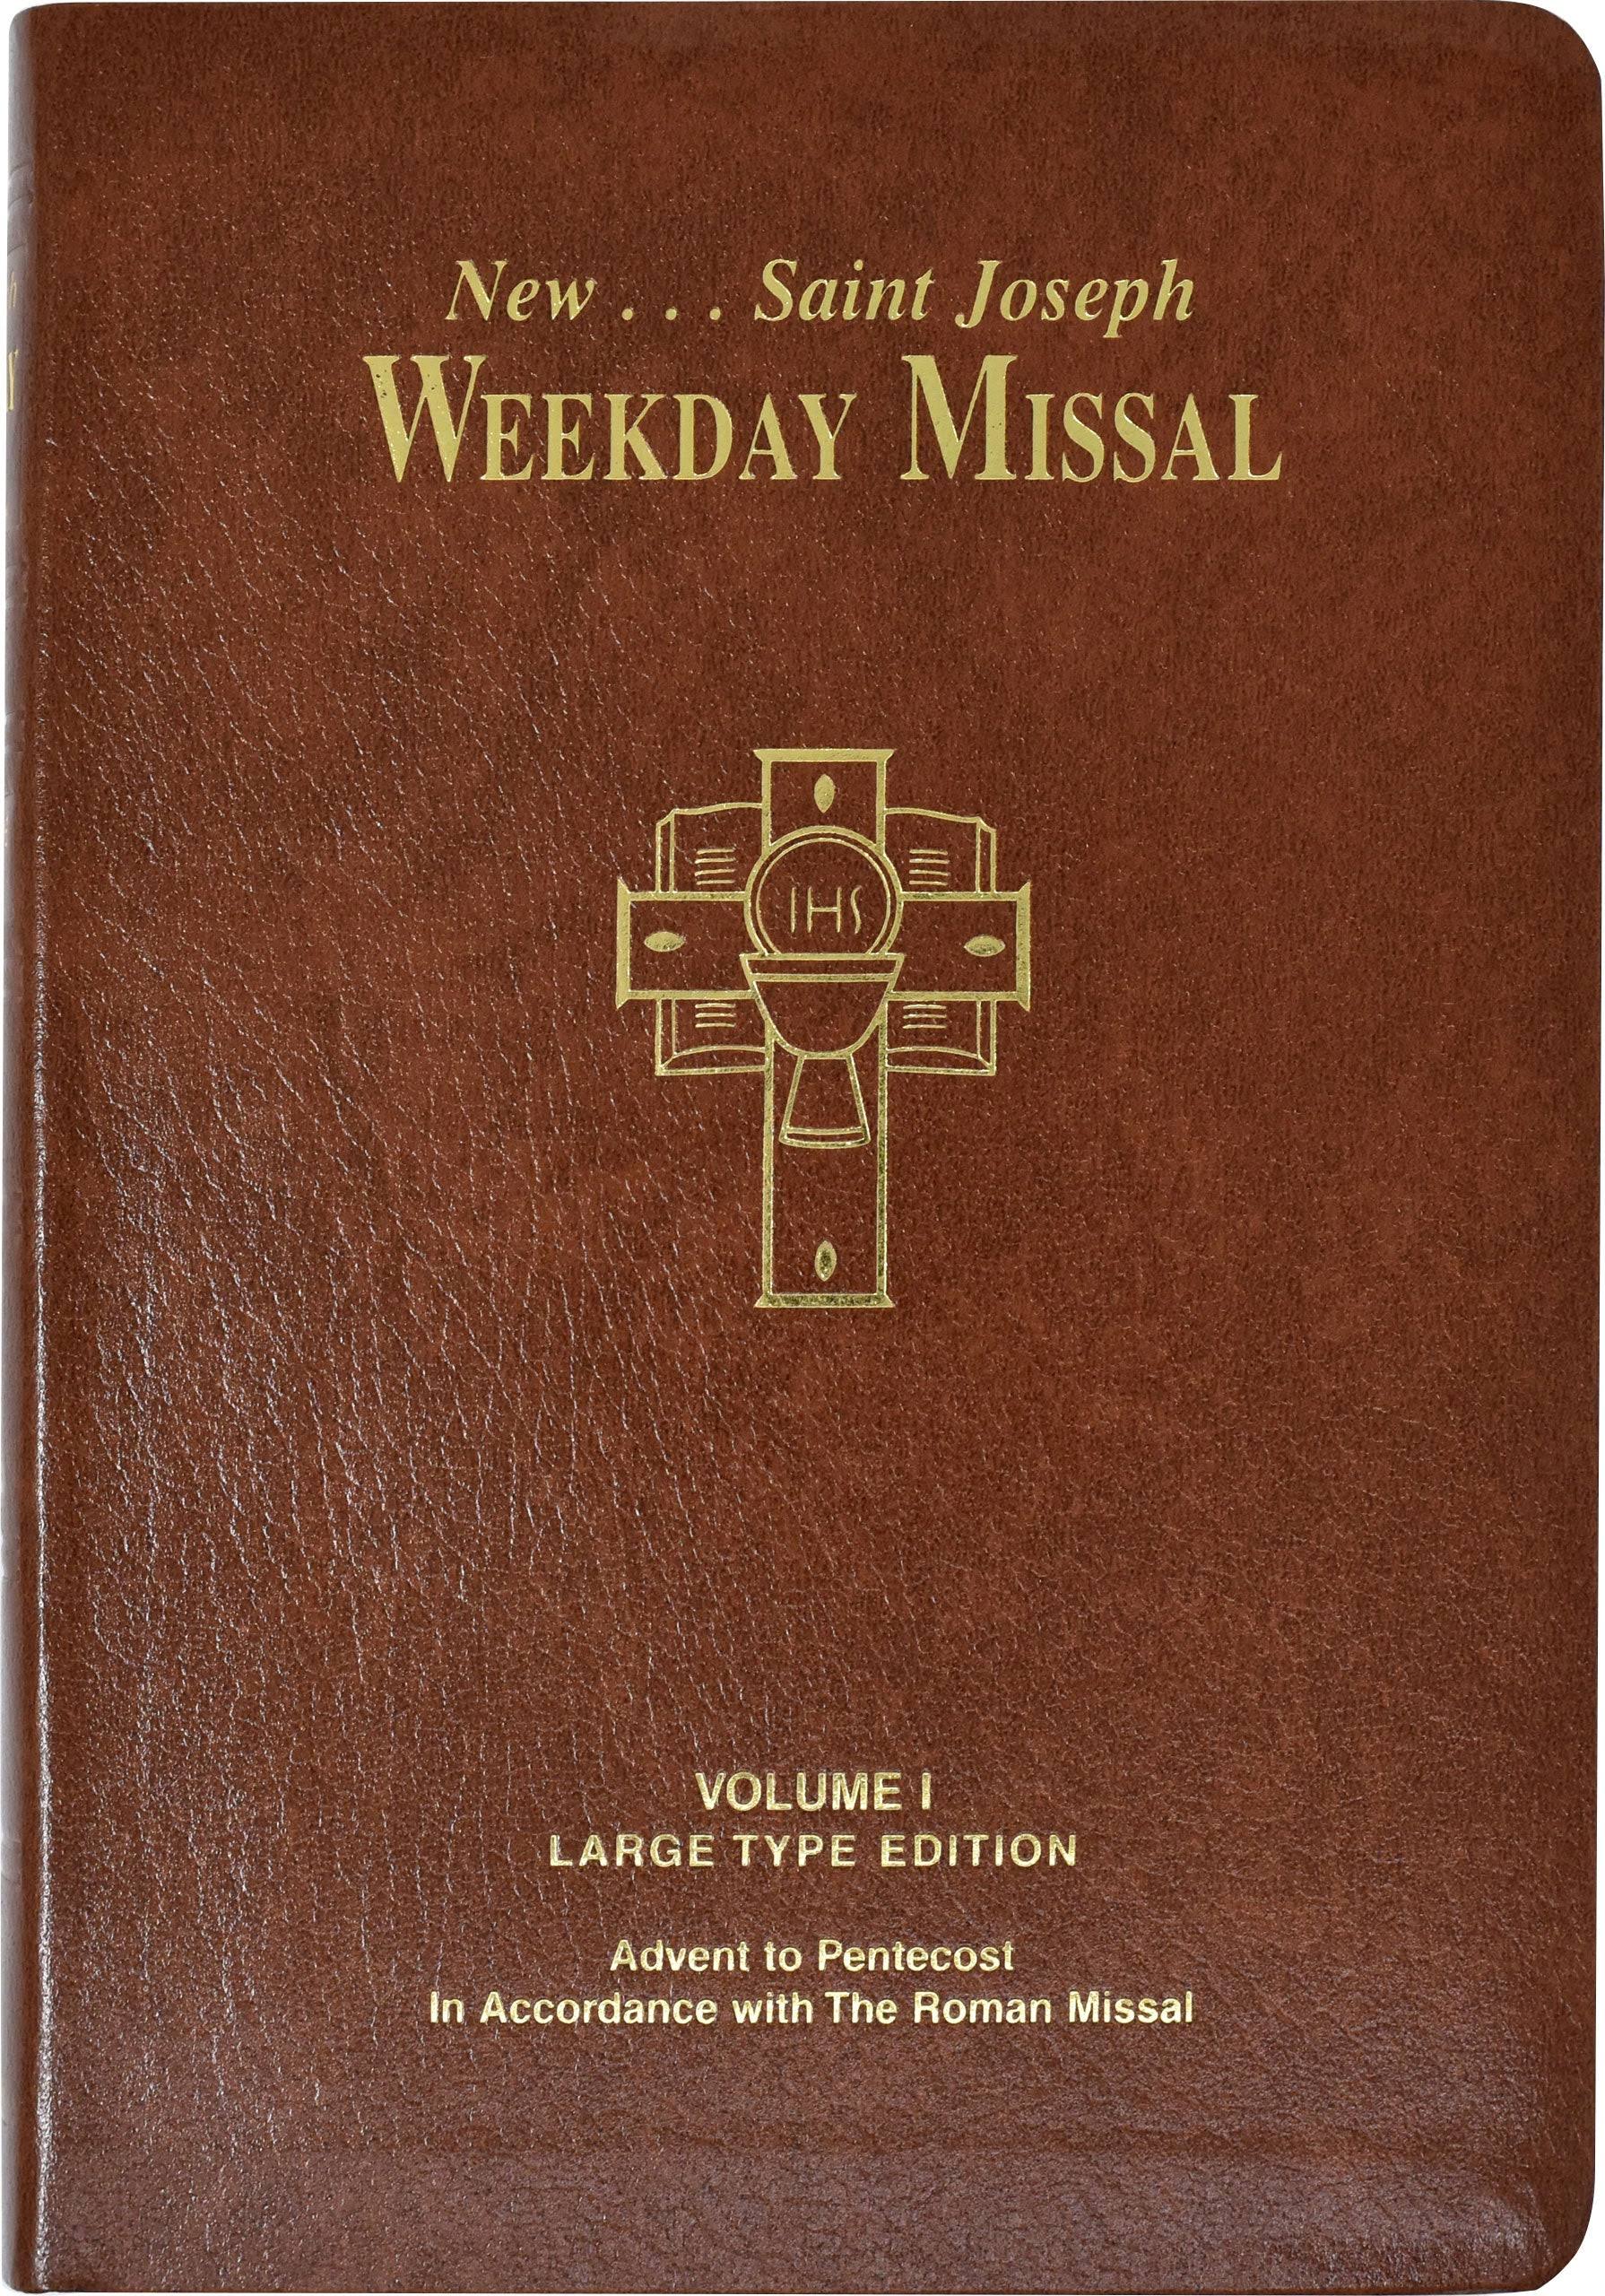 St. Joseph Weekday Missal: Large Type Edition - Bcl